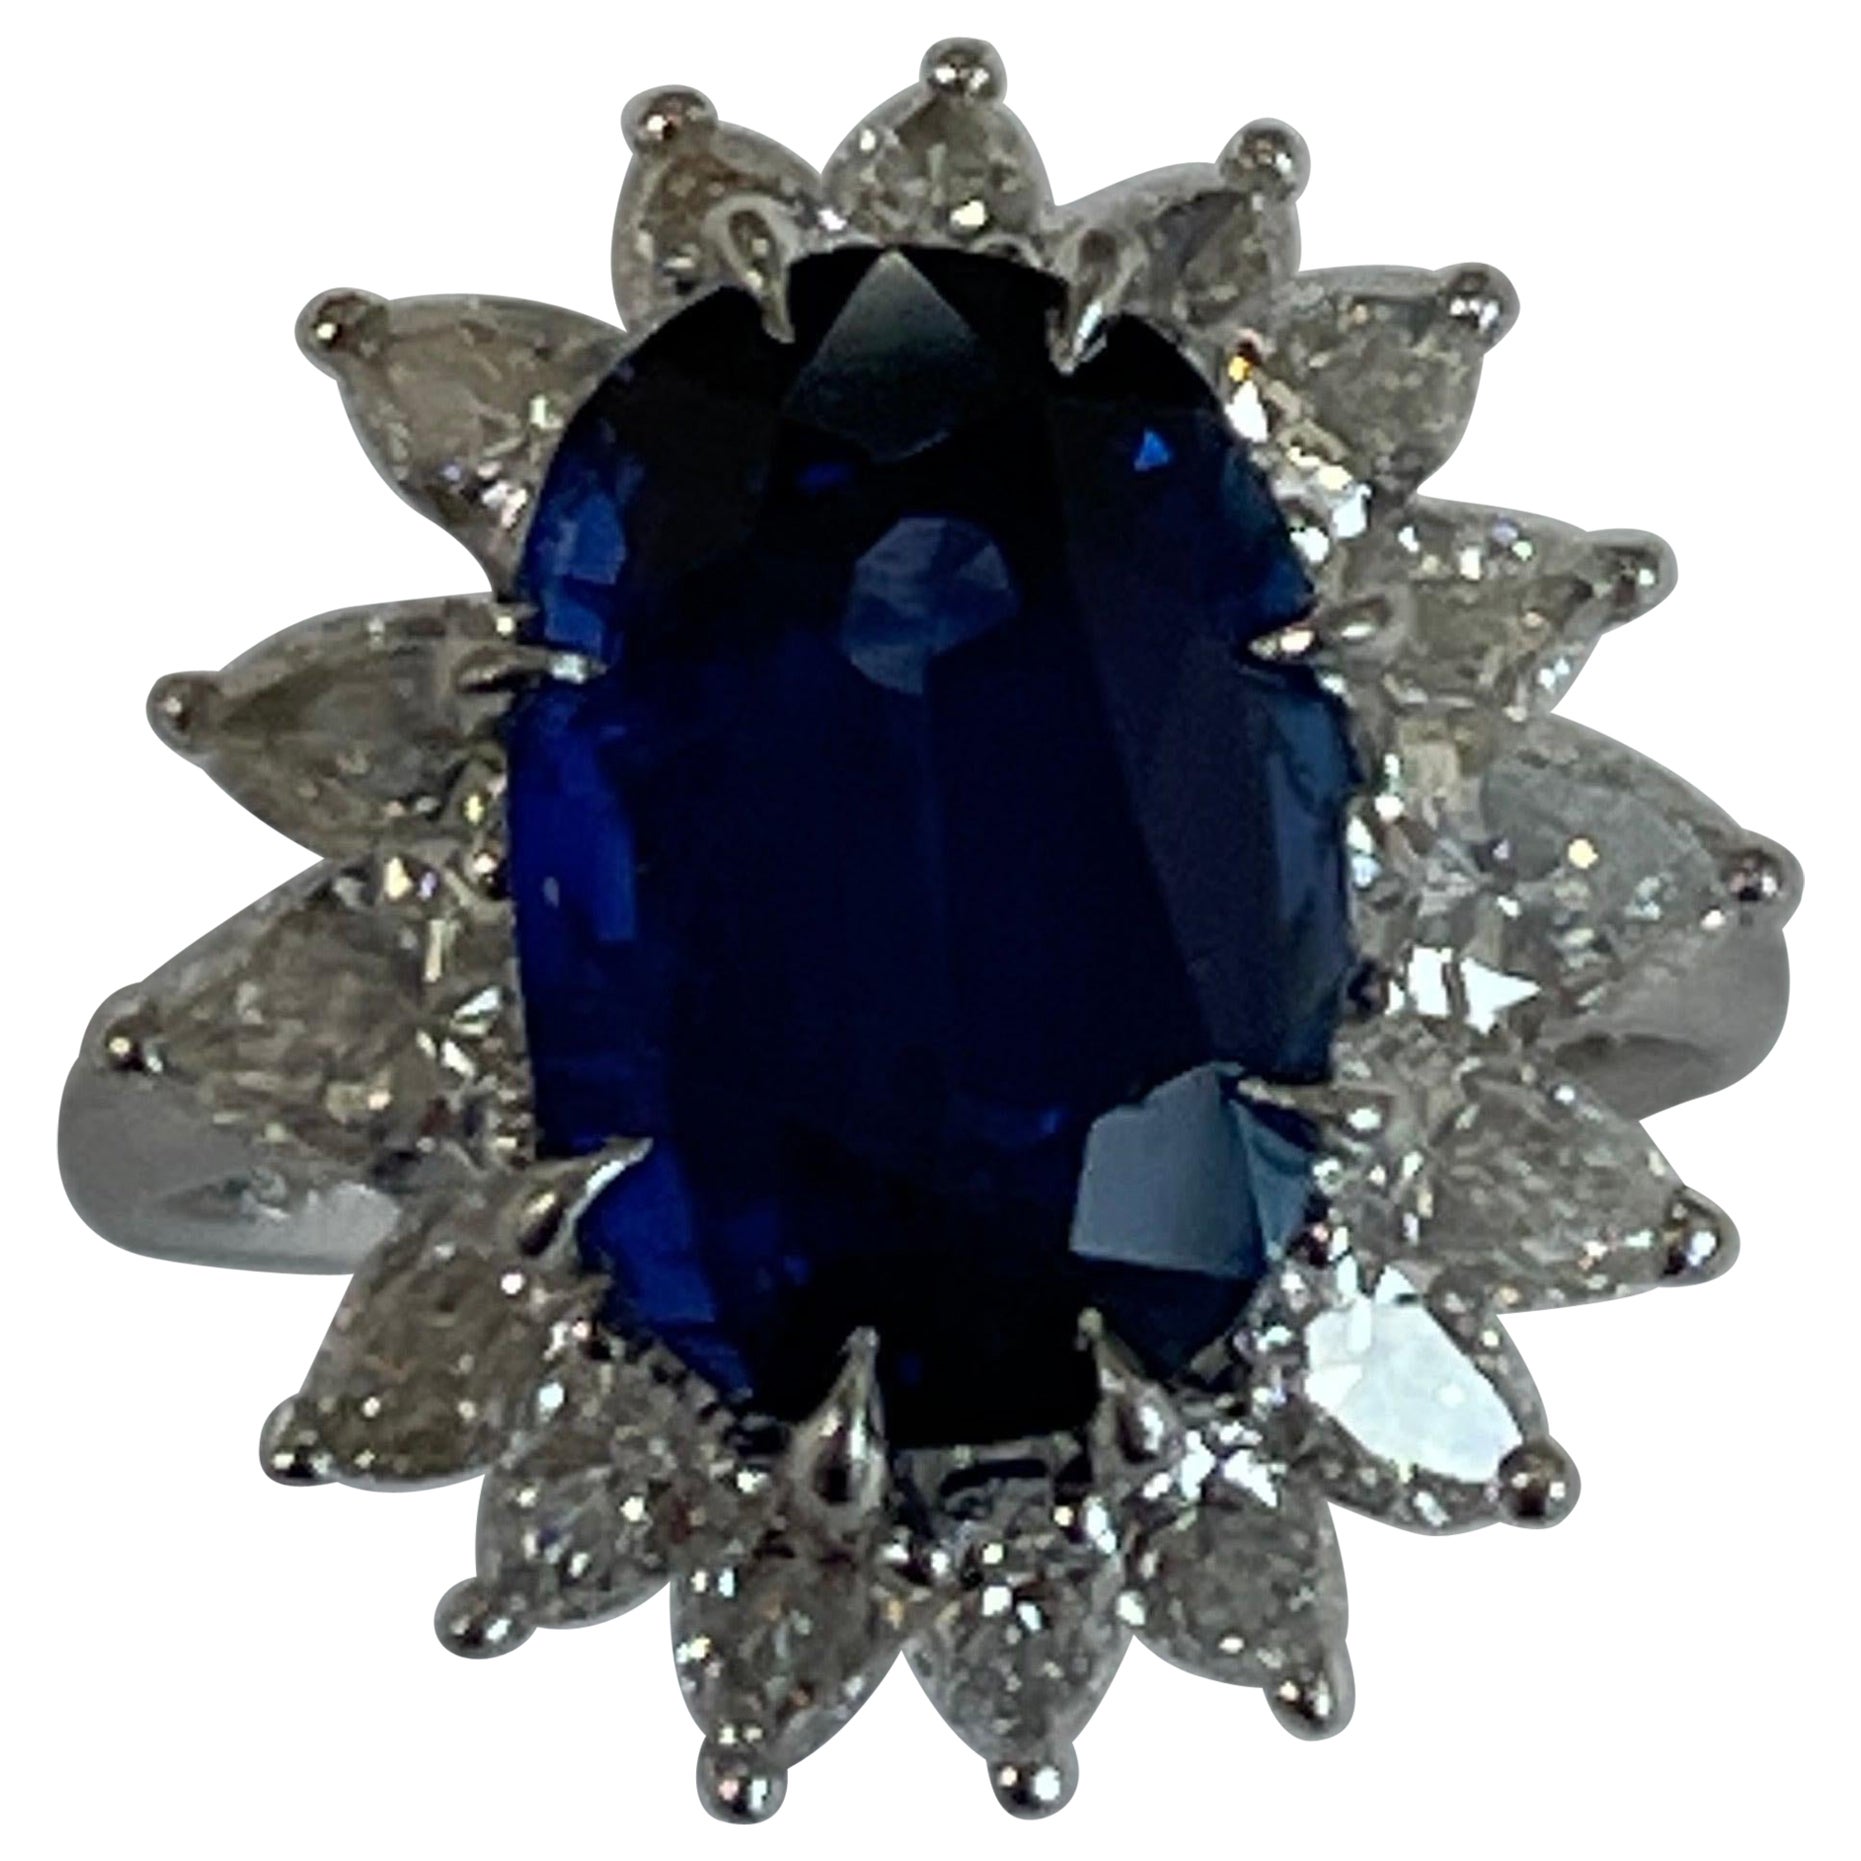 5.30 Carat Ceylon Sapphire Ring with 16 Pear Shape Diamonds 1.65 Ct by McTigue For Sale